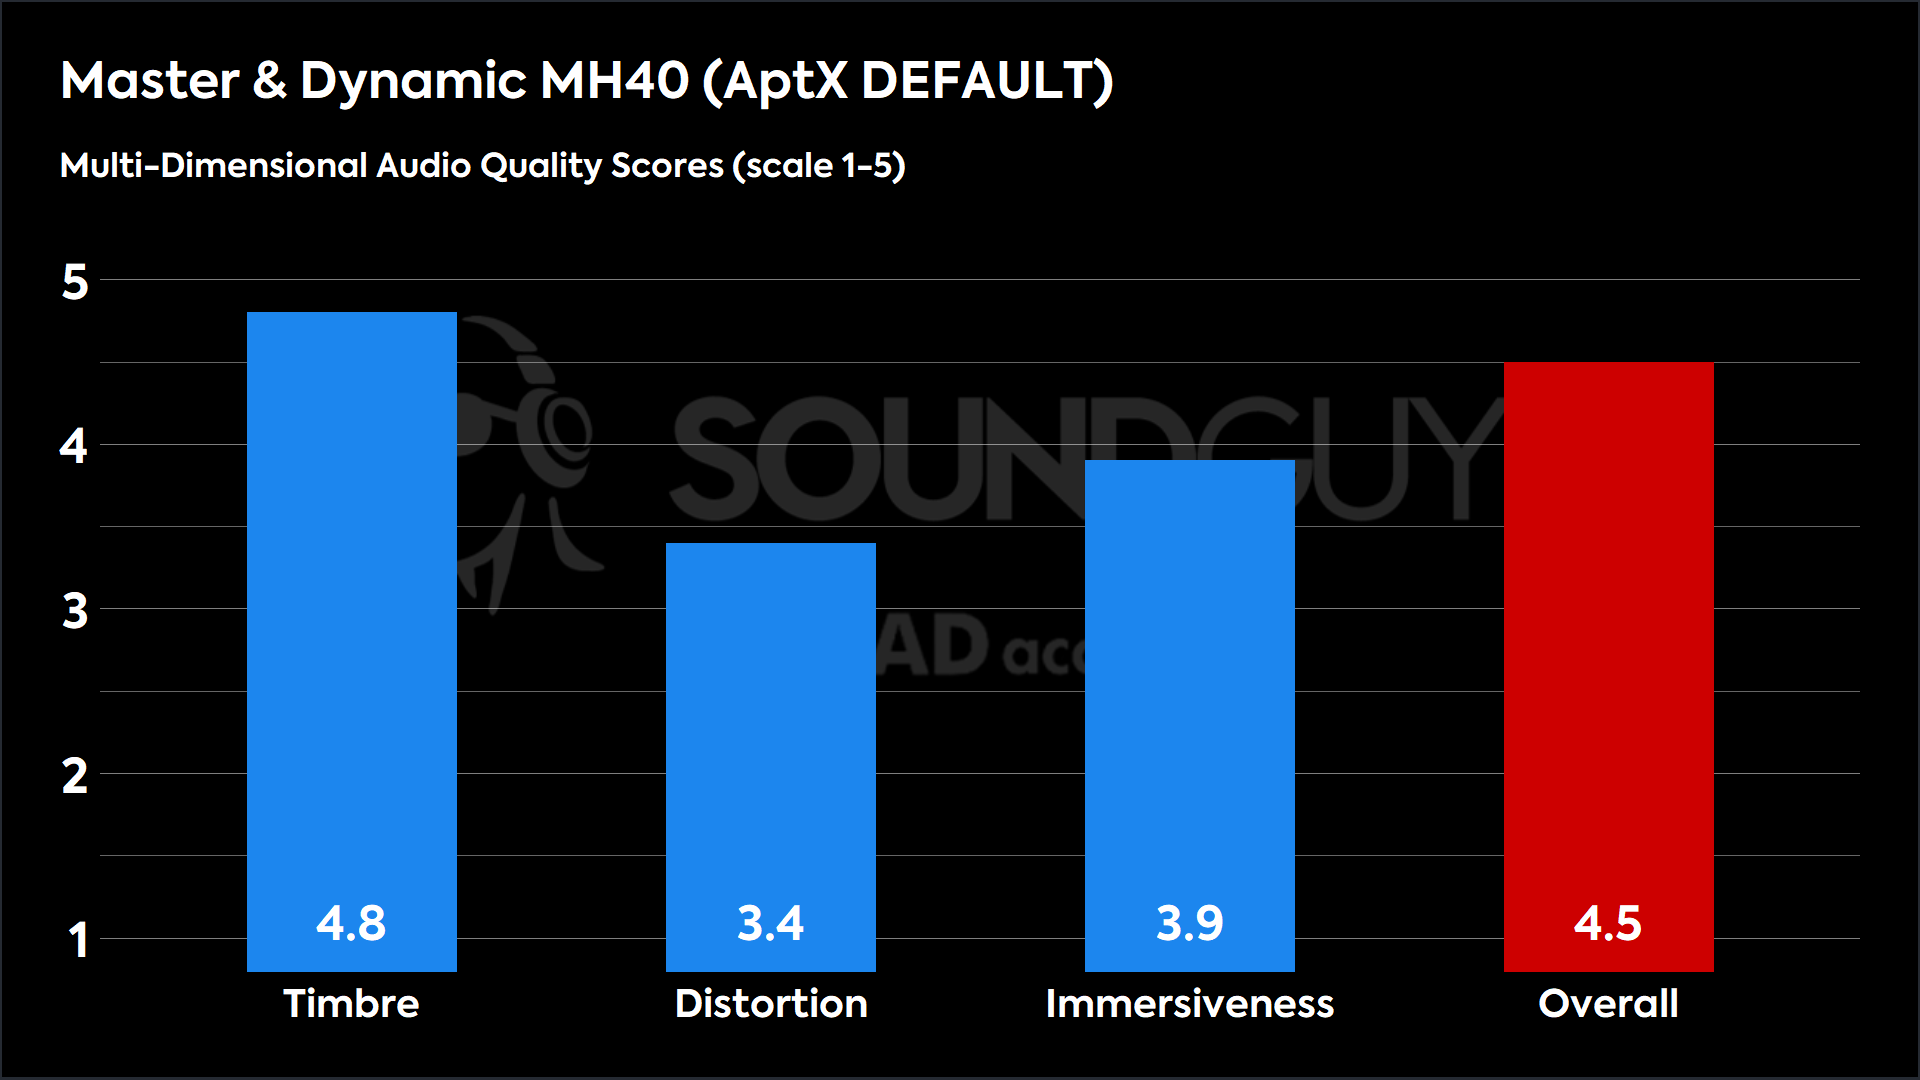 This chart shows the MDAQS results for the Master &amp; Dynamic MH40 in AptX DEFAULT mode. The Timbre score is 4.8, The Distortion score is 3.4, the Immersiveness score is 3.9, and the Overall Score is 4.5.